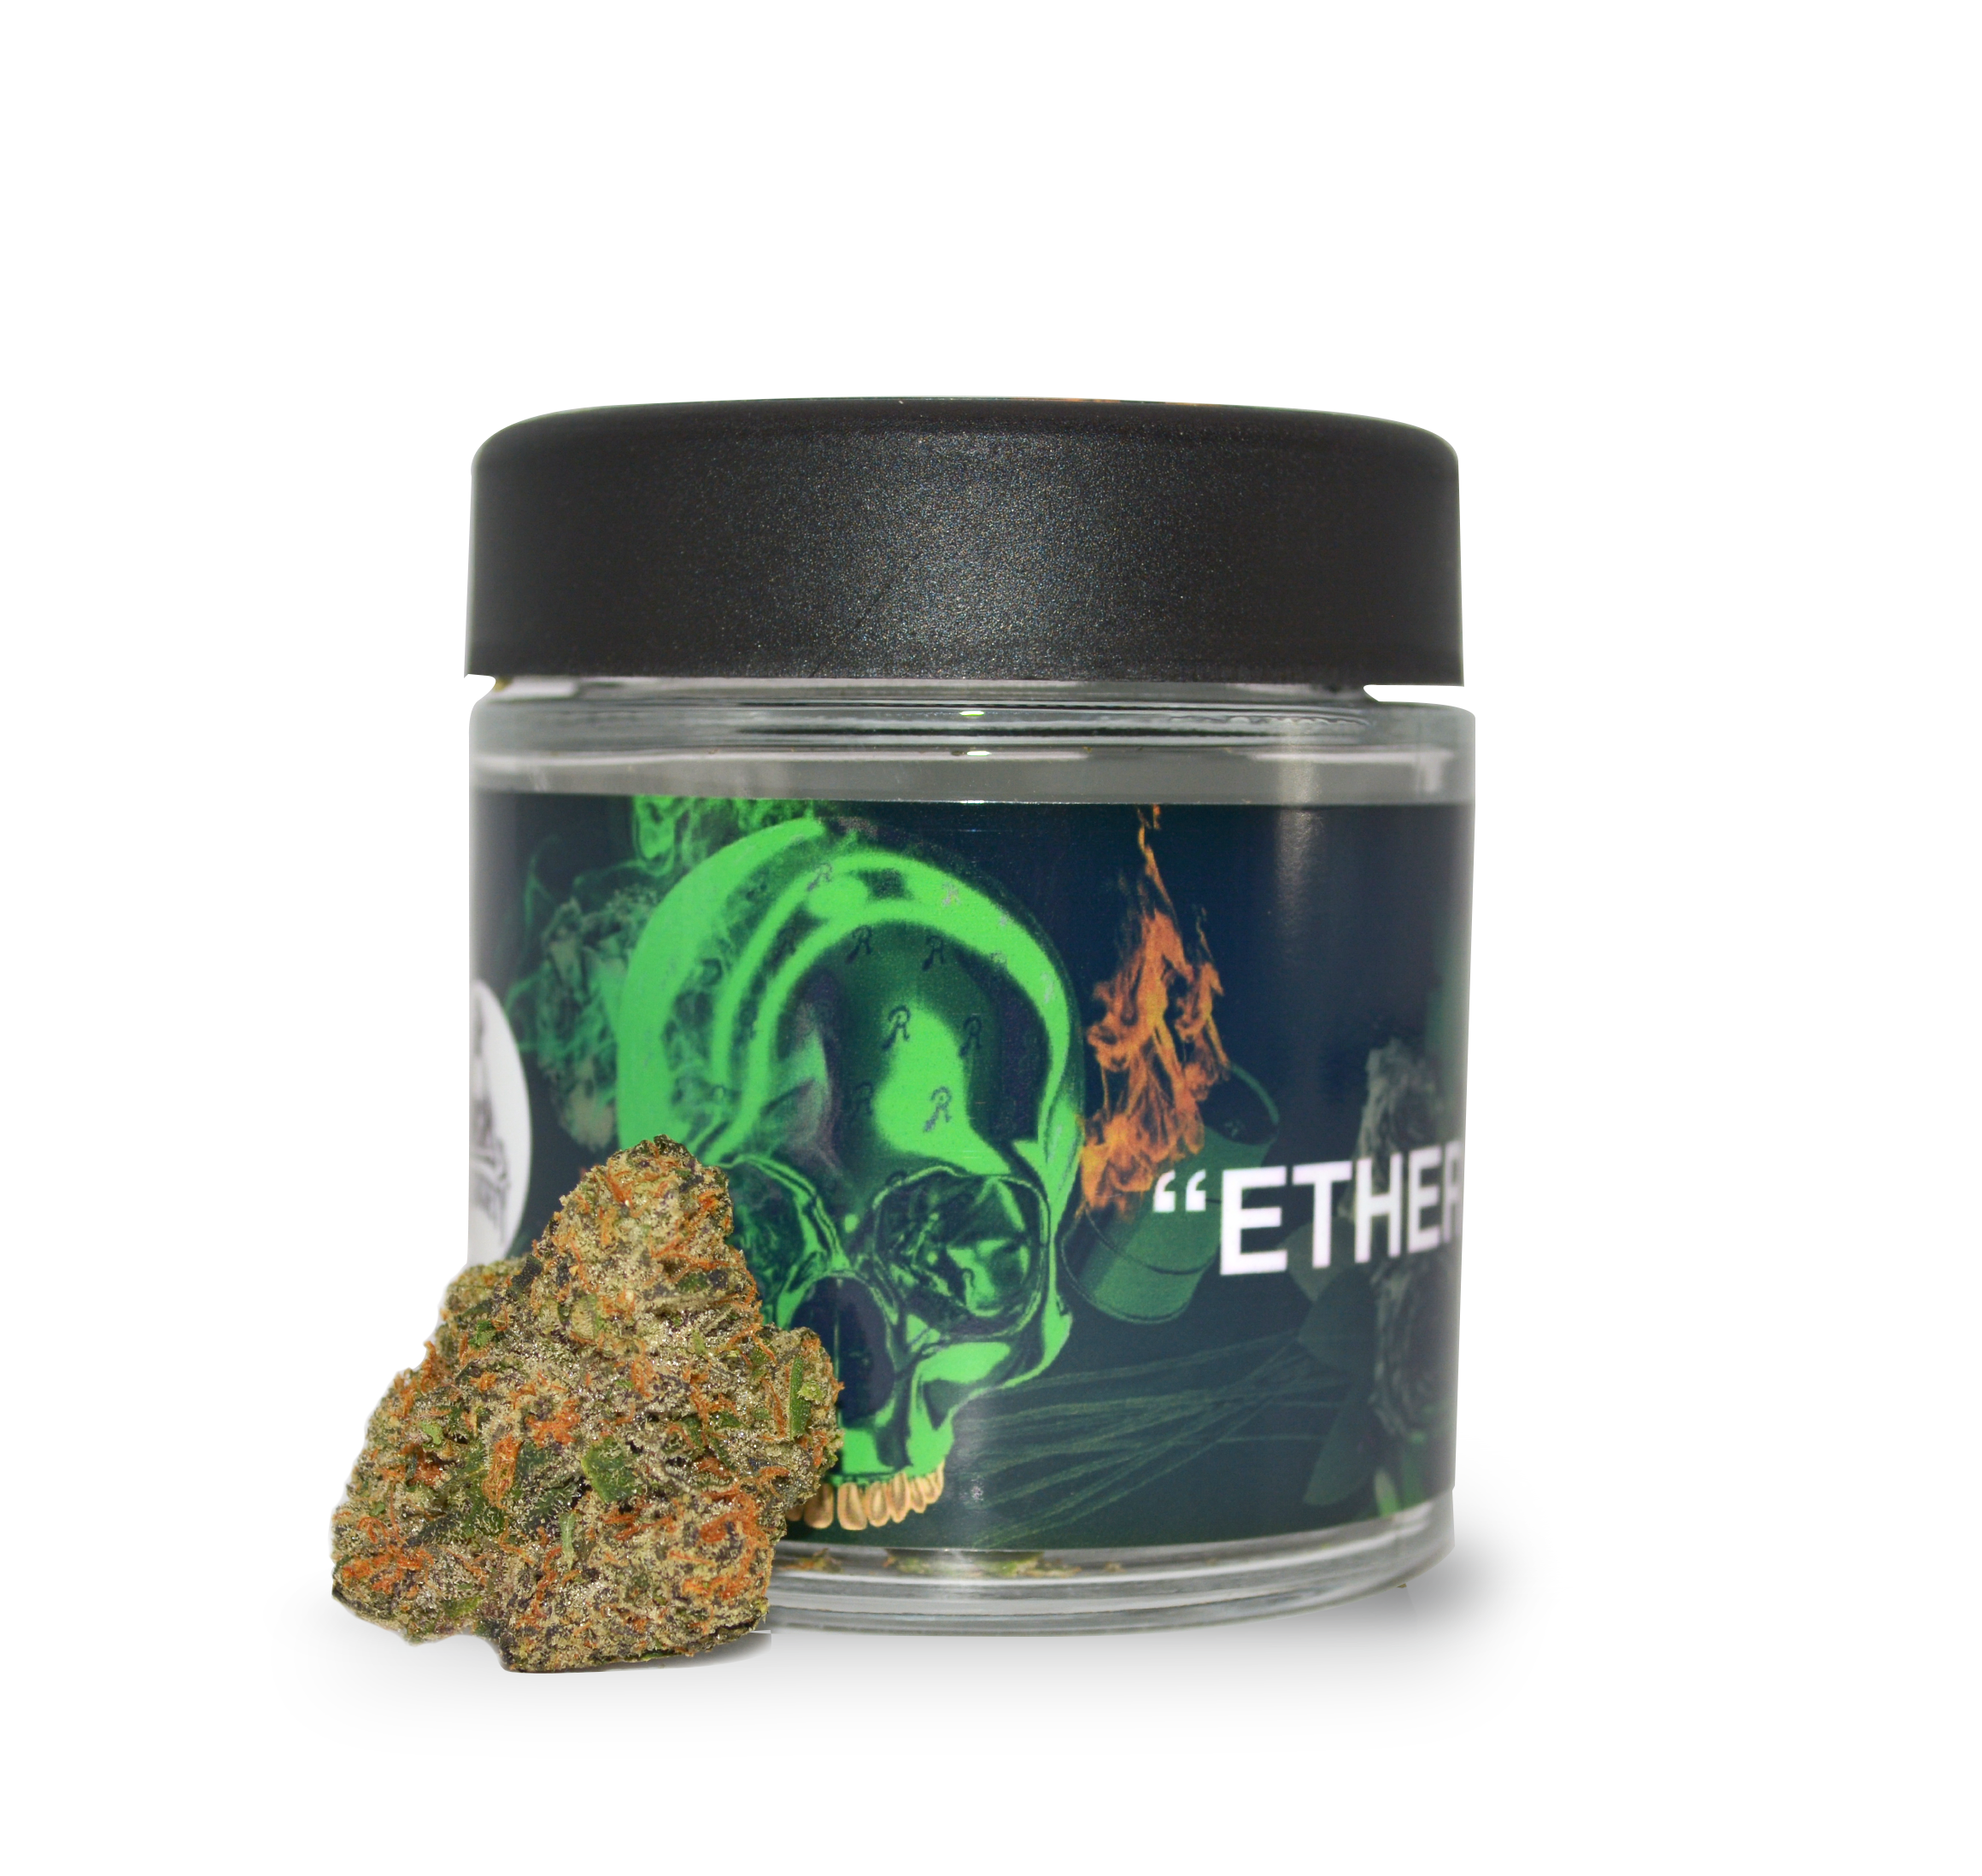 THE FIRE SOCIETY | Ether - 3.5g - https://overlanddelivery.com